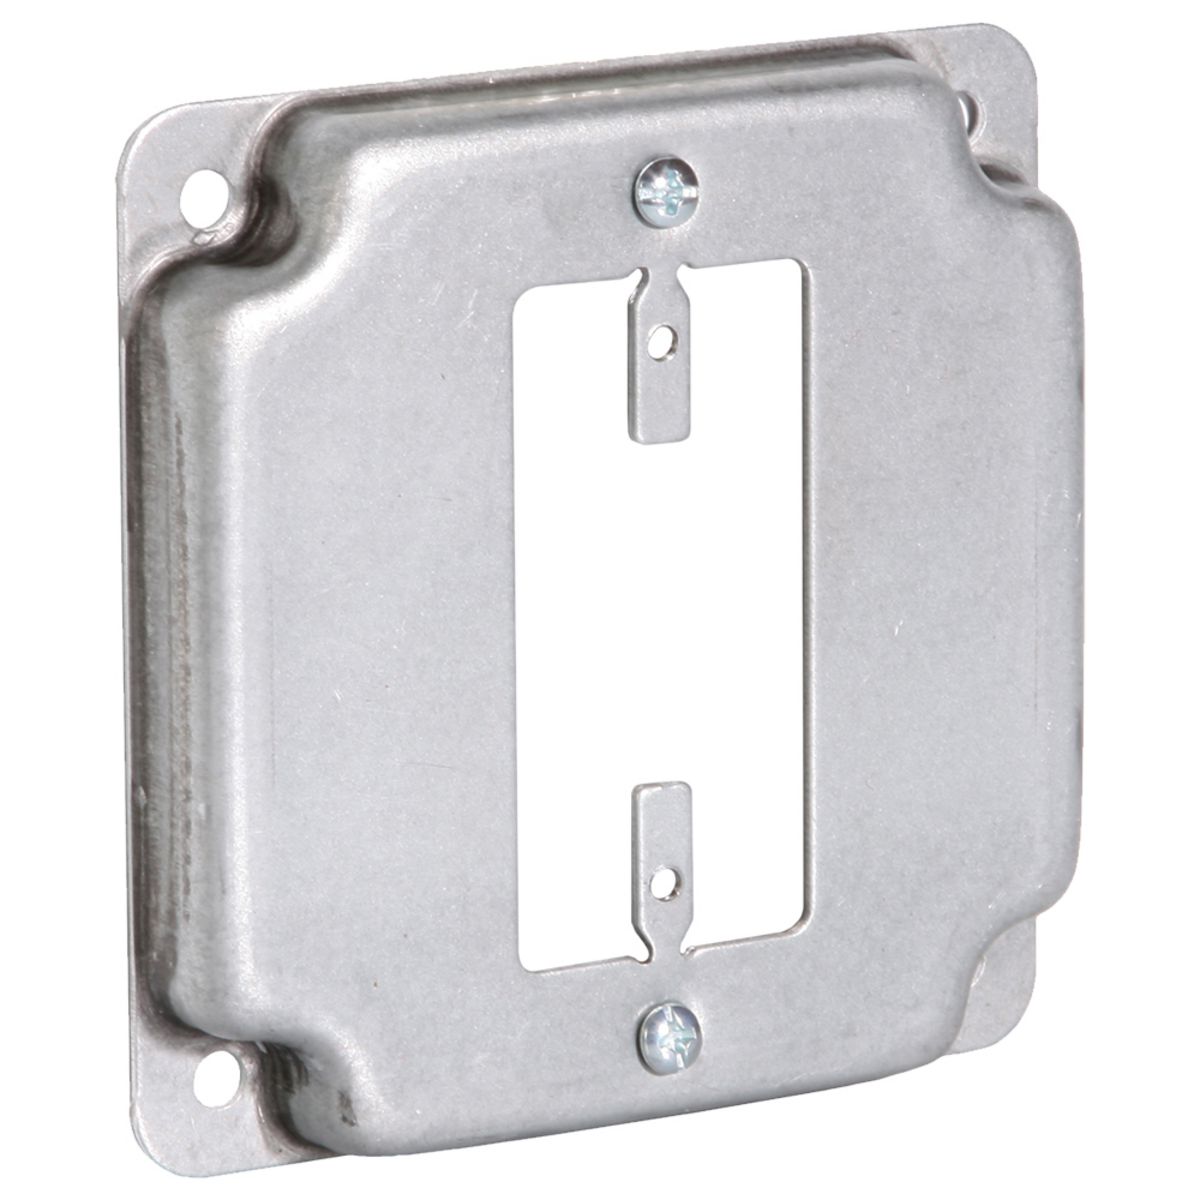 NEW RACO 4" Square Receptacle 808 Electrical Switch Cover Single GFCI DECOR 